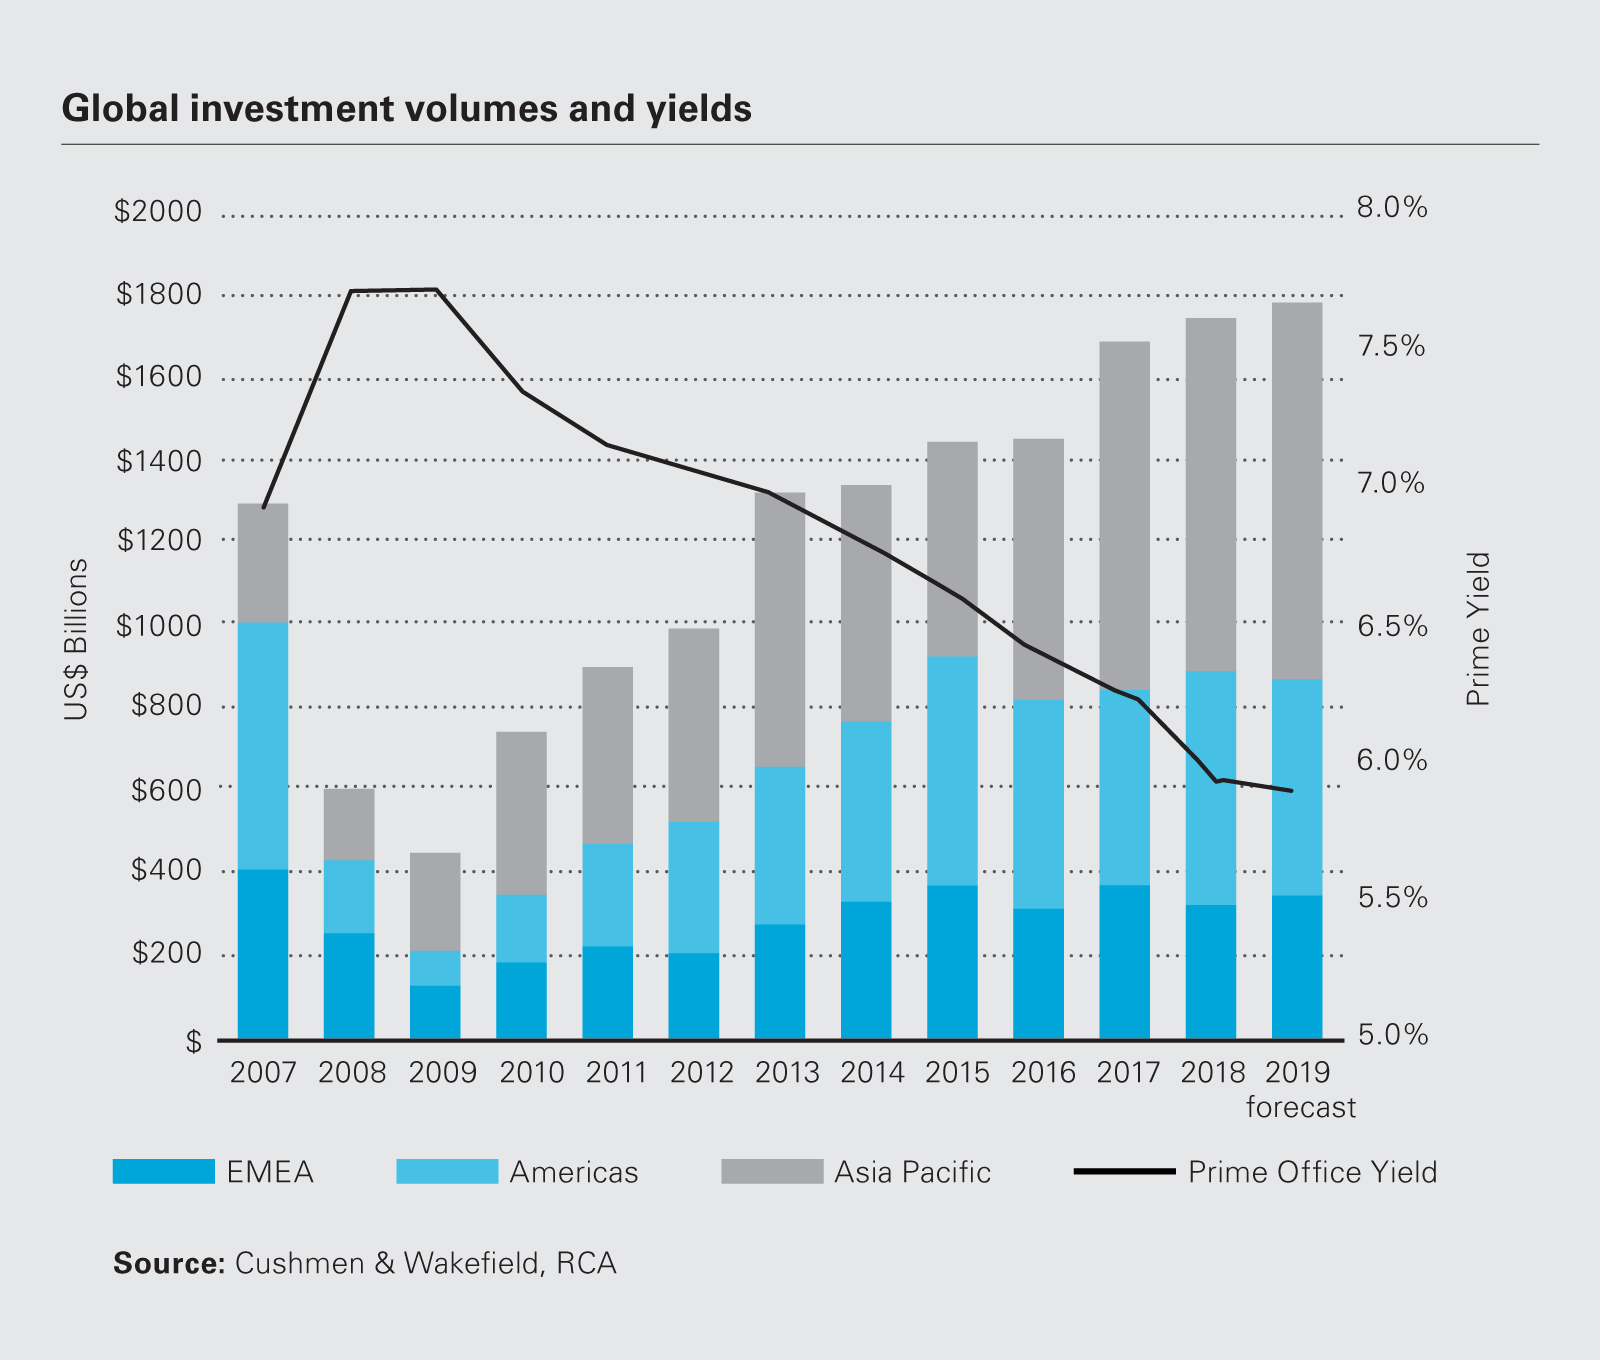 Global investment volumes and yields